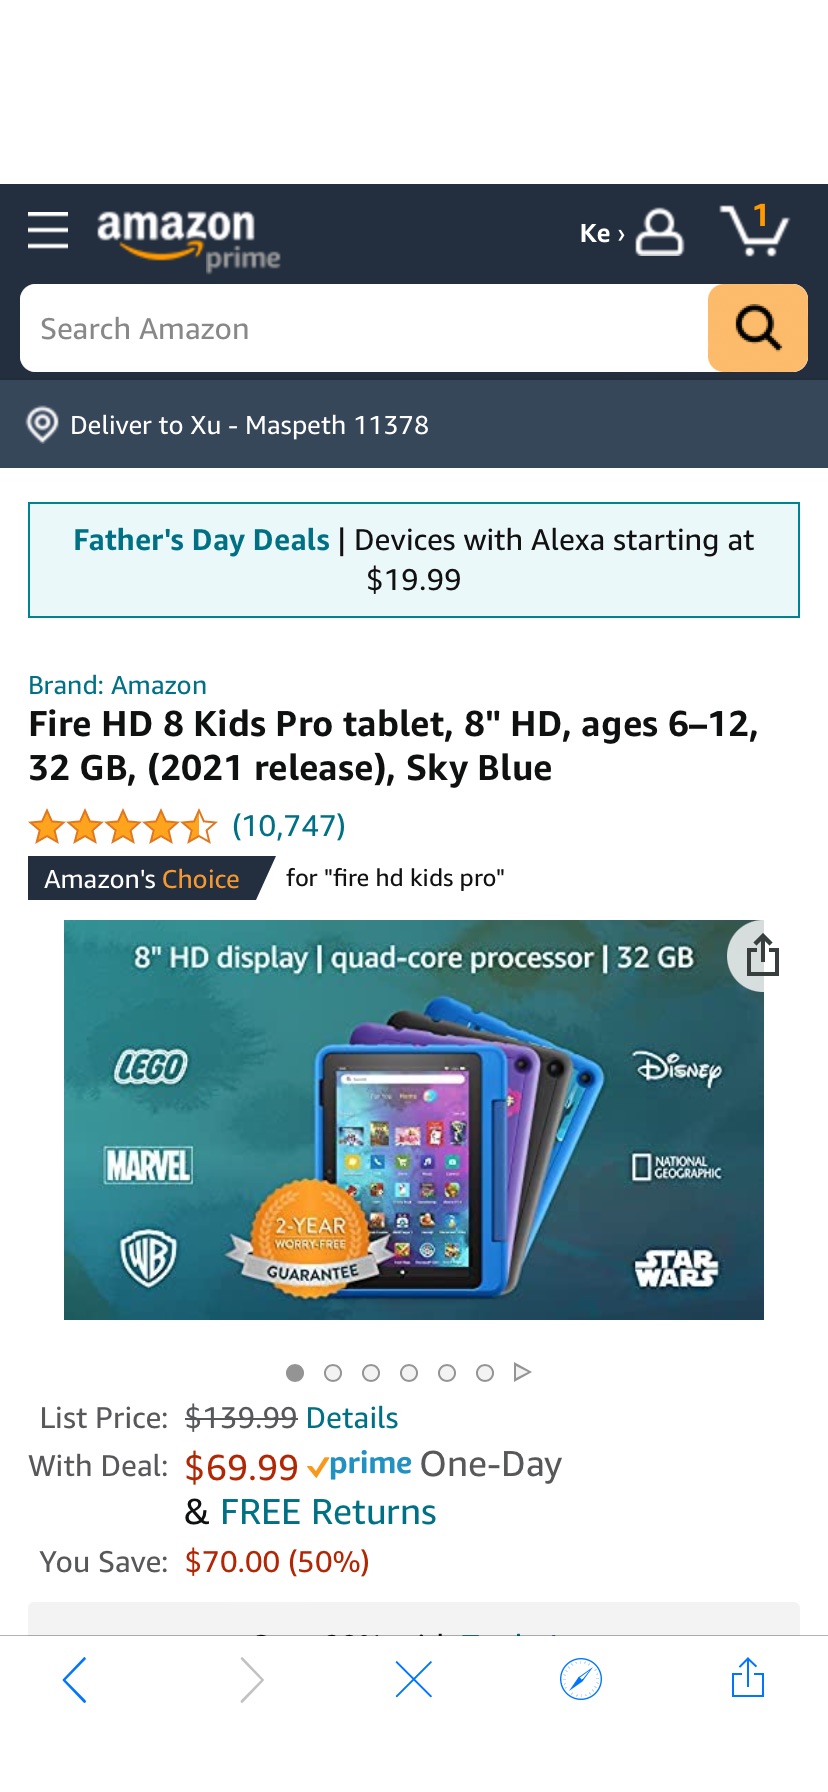 Amazon Official Site: Fire HD 8 Kids Pro tablet, 8" HD, ages 6 – 12, 32 GB 儿童fire HD 平板降价，仅$69.xx （原价$139）